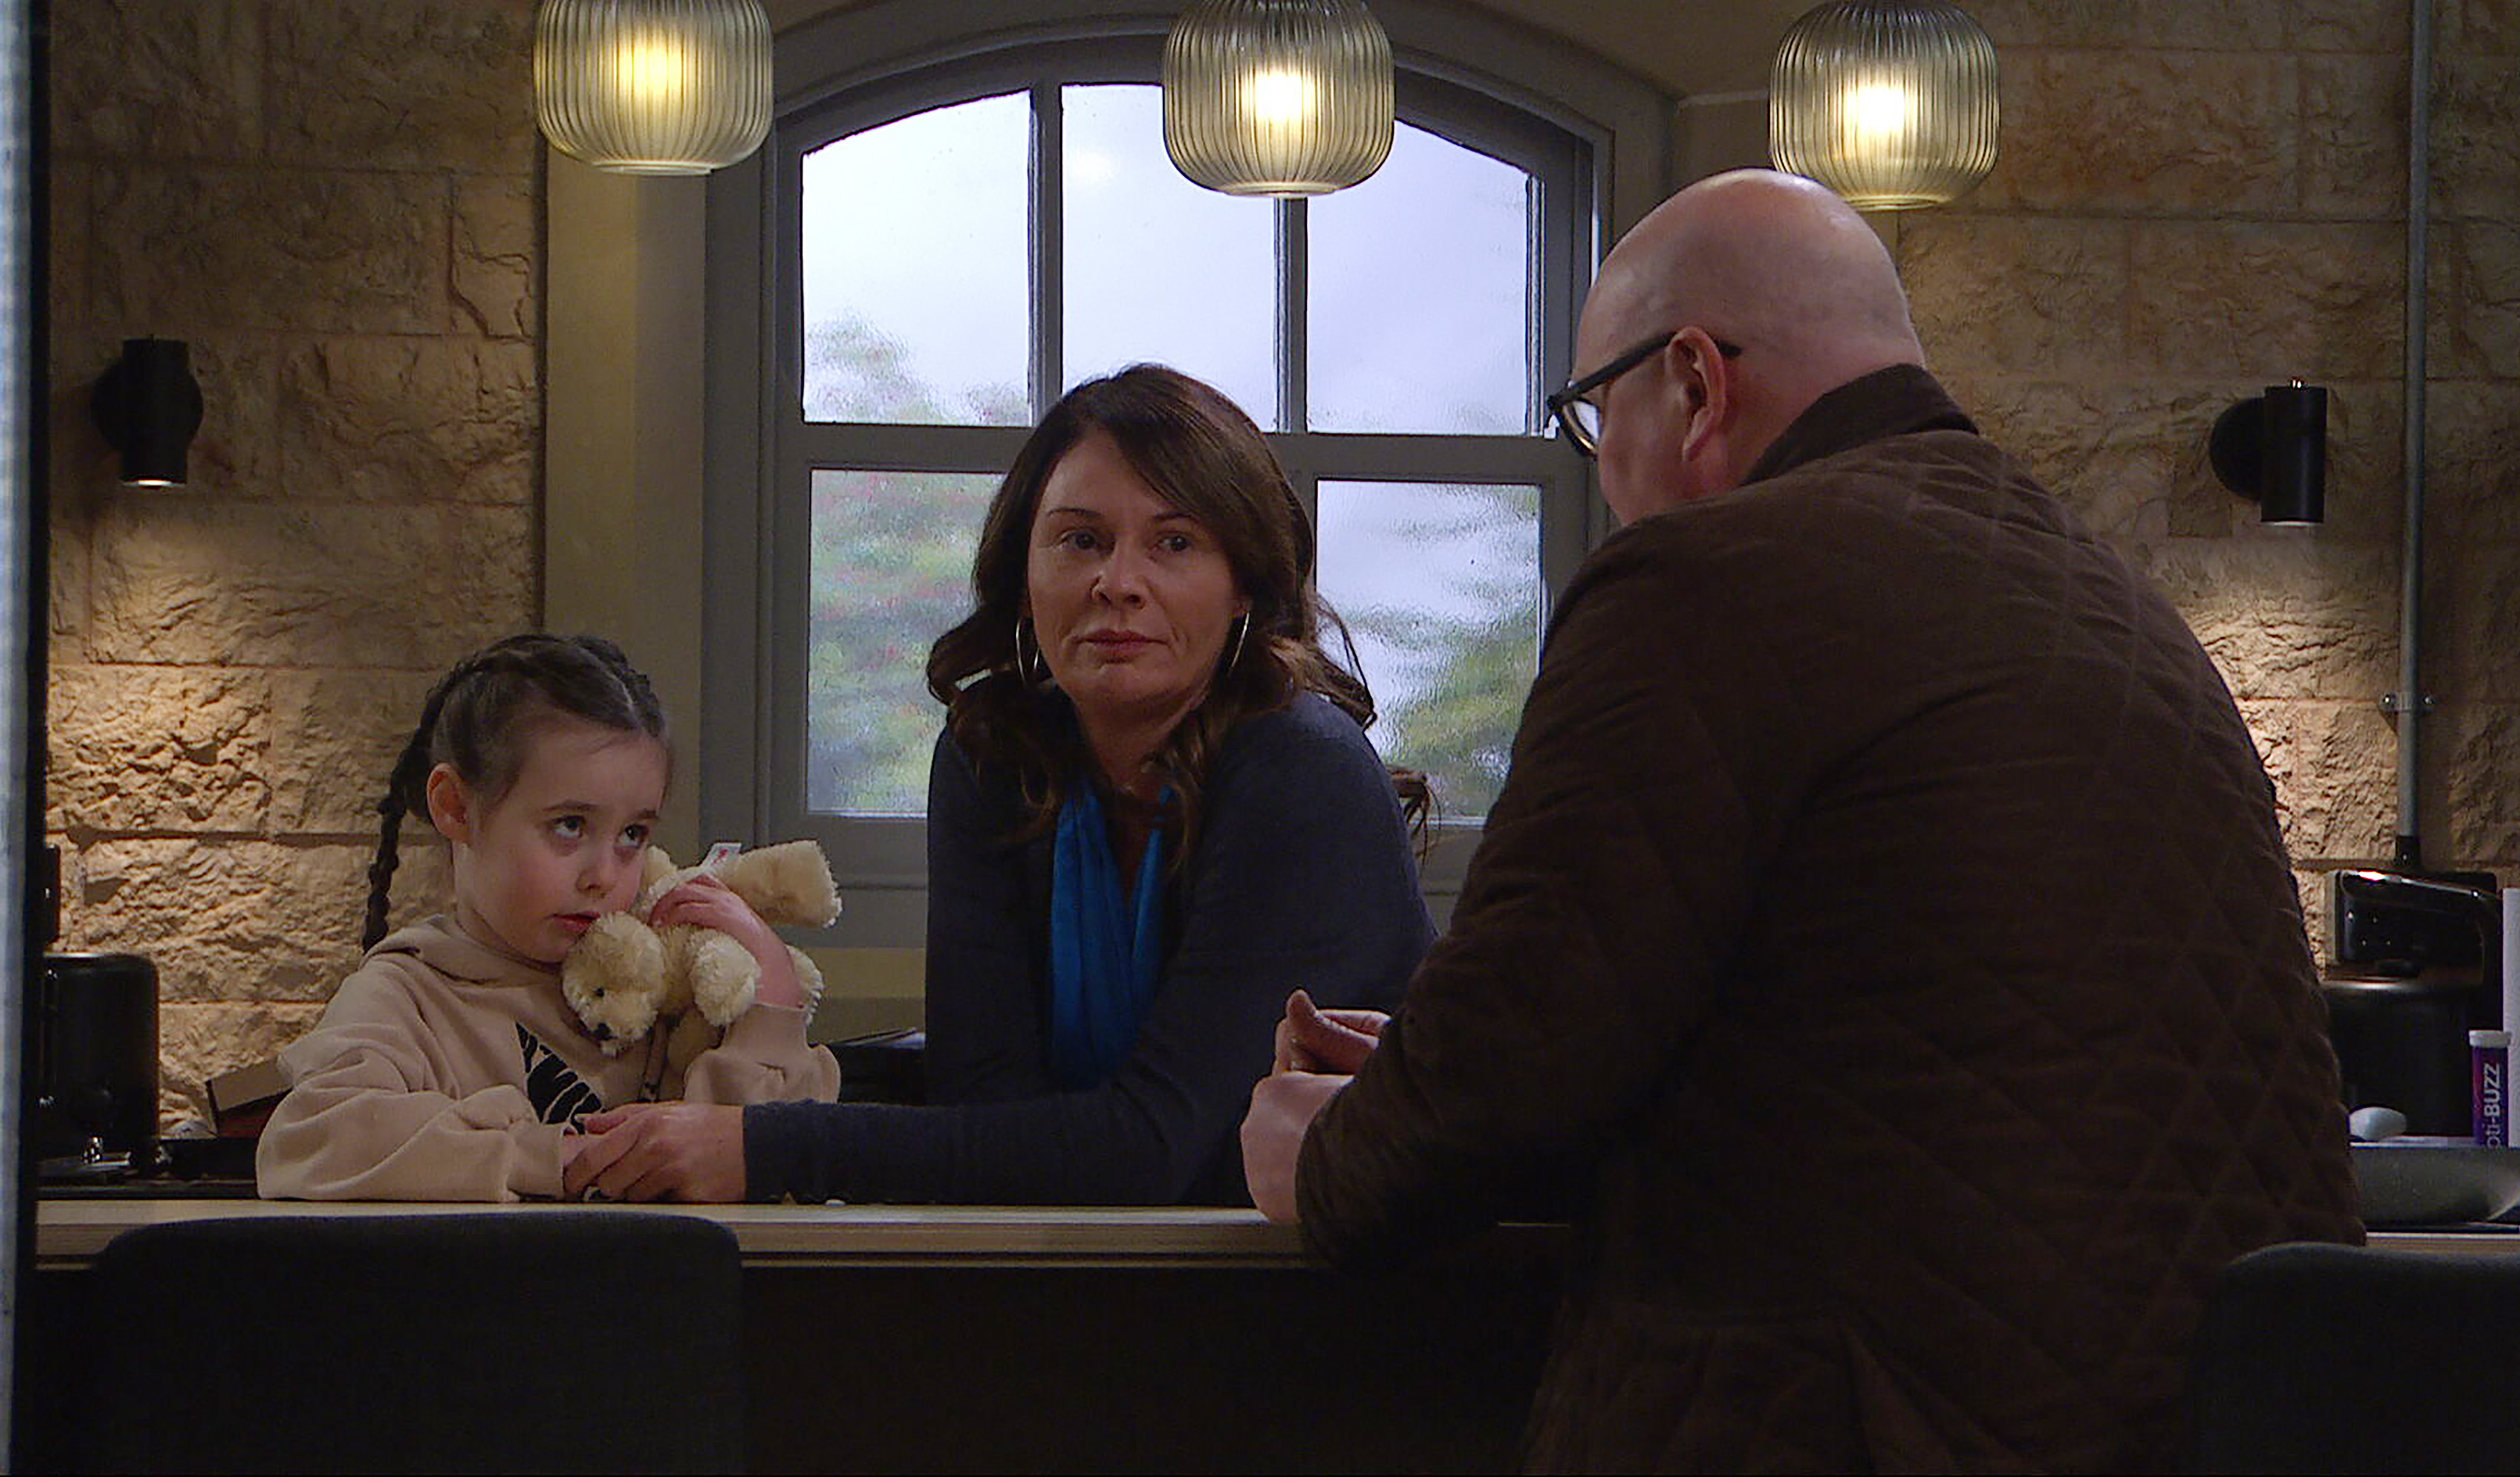 How will she and Paddy help Eve understand what is happening?